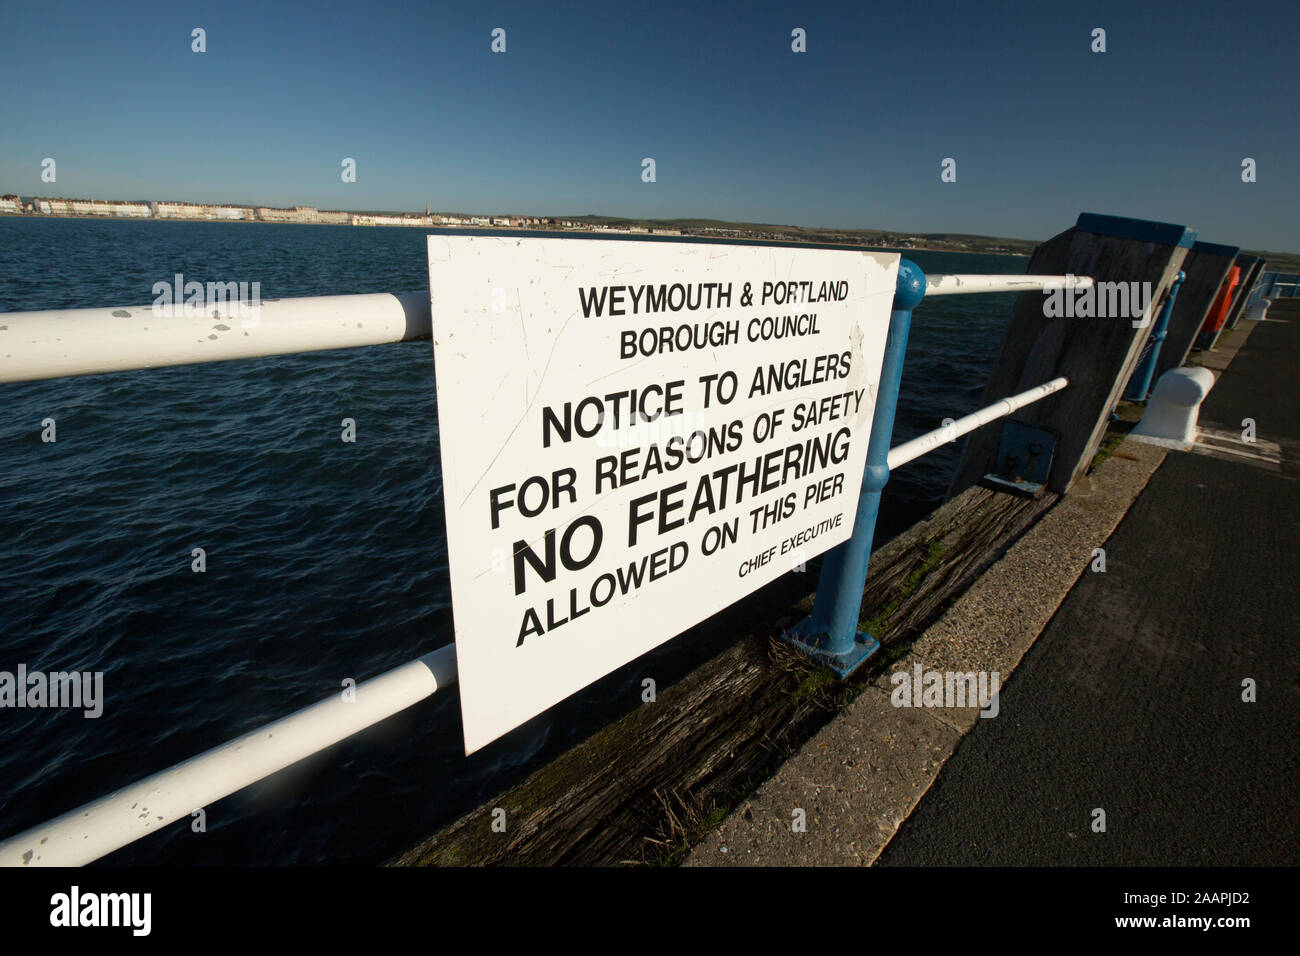 A sign on Weymouth’s Pleasure Pier indicating that no feathering is allowed. Feathering is a method of fishing, generally for mackerel, that involves Stock Photo